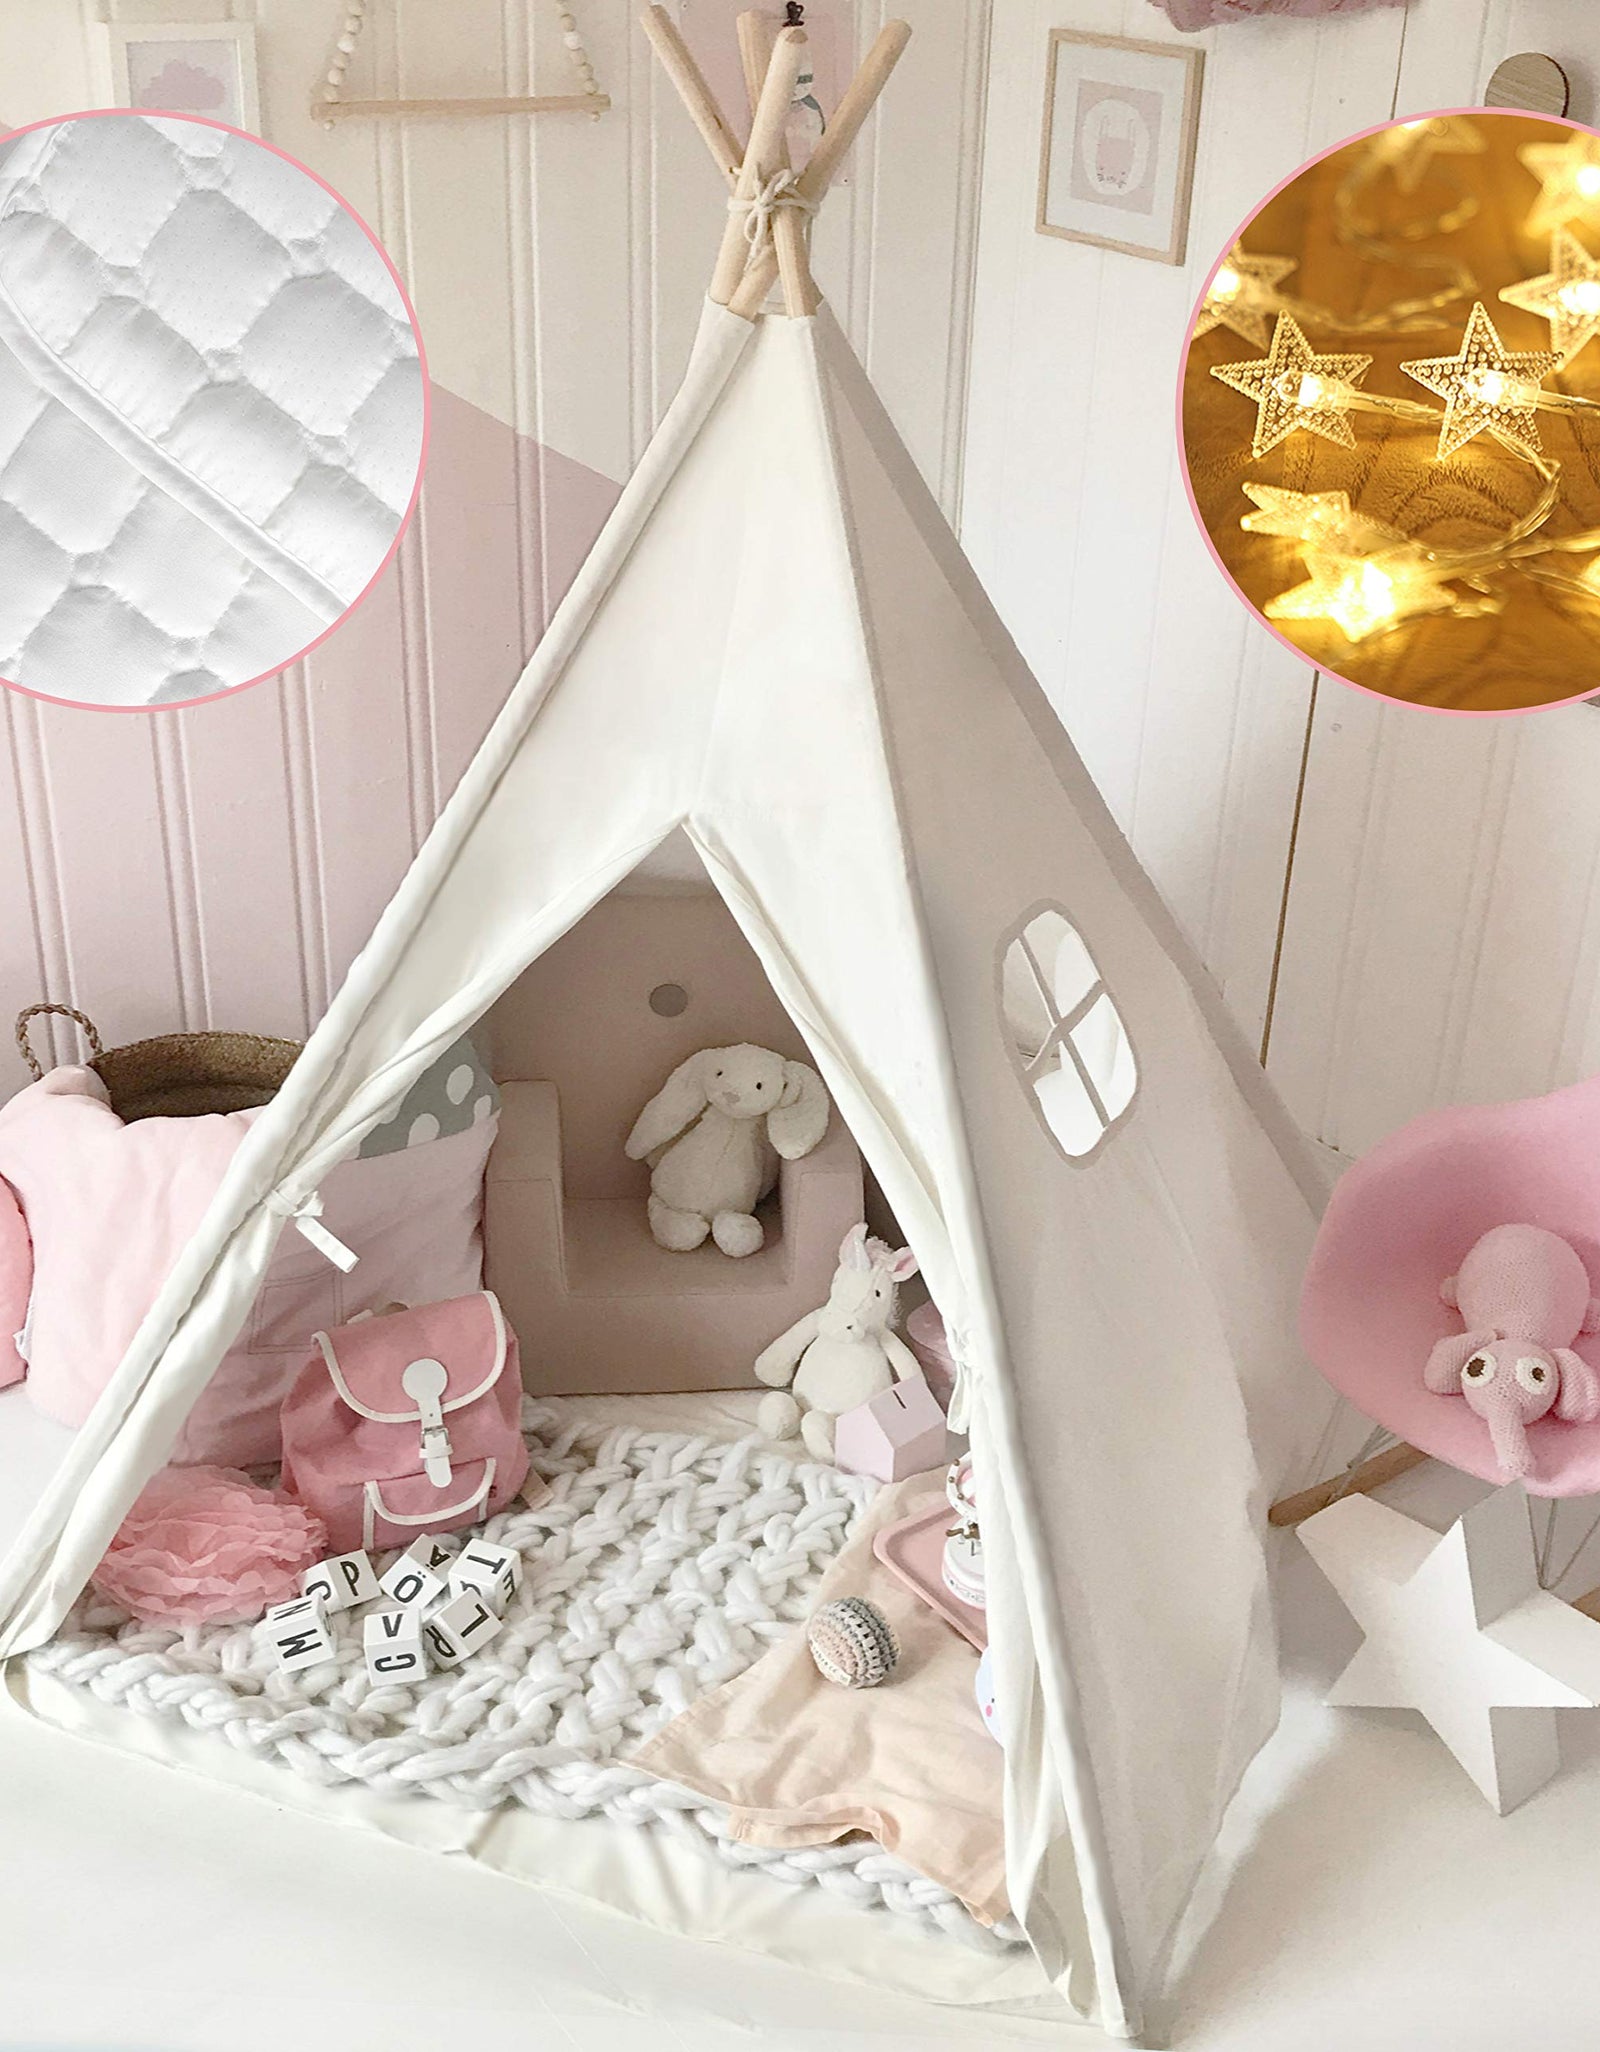 Tiny Land Kids Teepee Tent with Mat & Light String & Carry Case-Kids Foldable Play Tent-Toys for Girls Indoor Outdoor Games, Raw White Canvas Teepee-Kids Playhouse-Portable Kids Tent